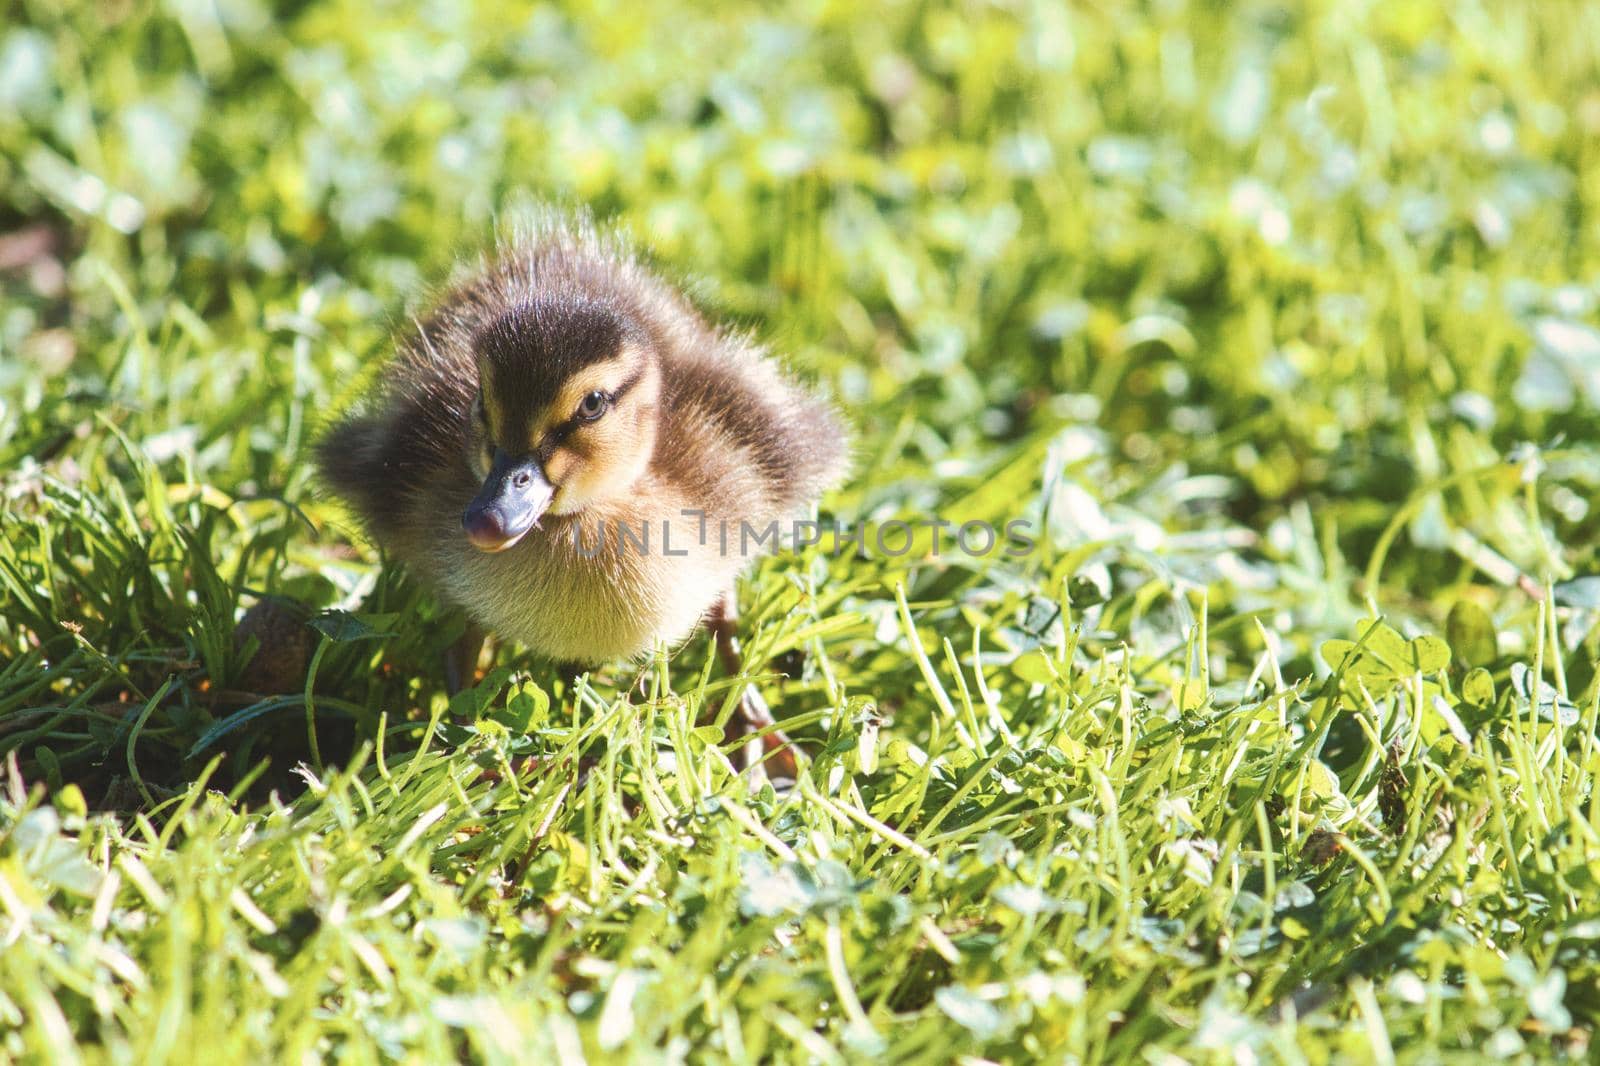 Cute little baby duckling waddling on the green grass